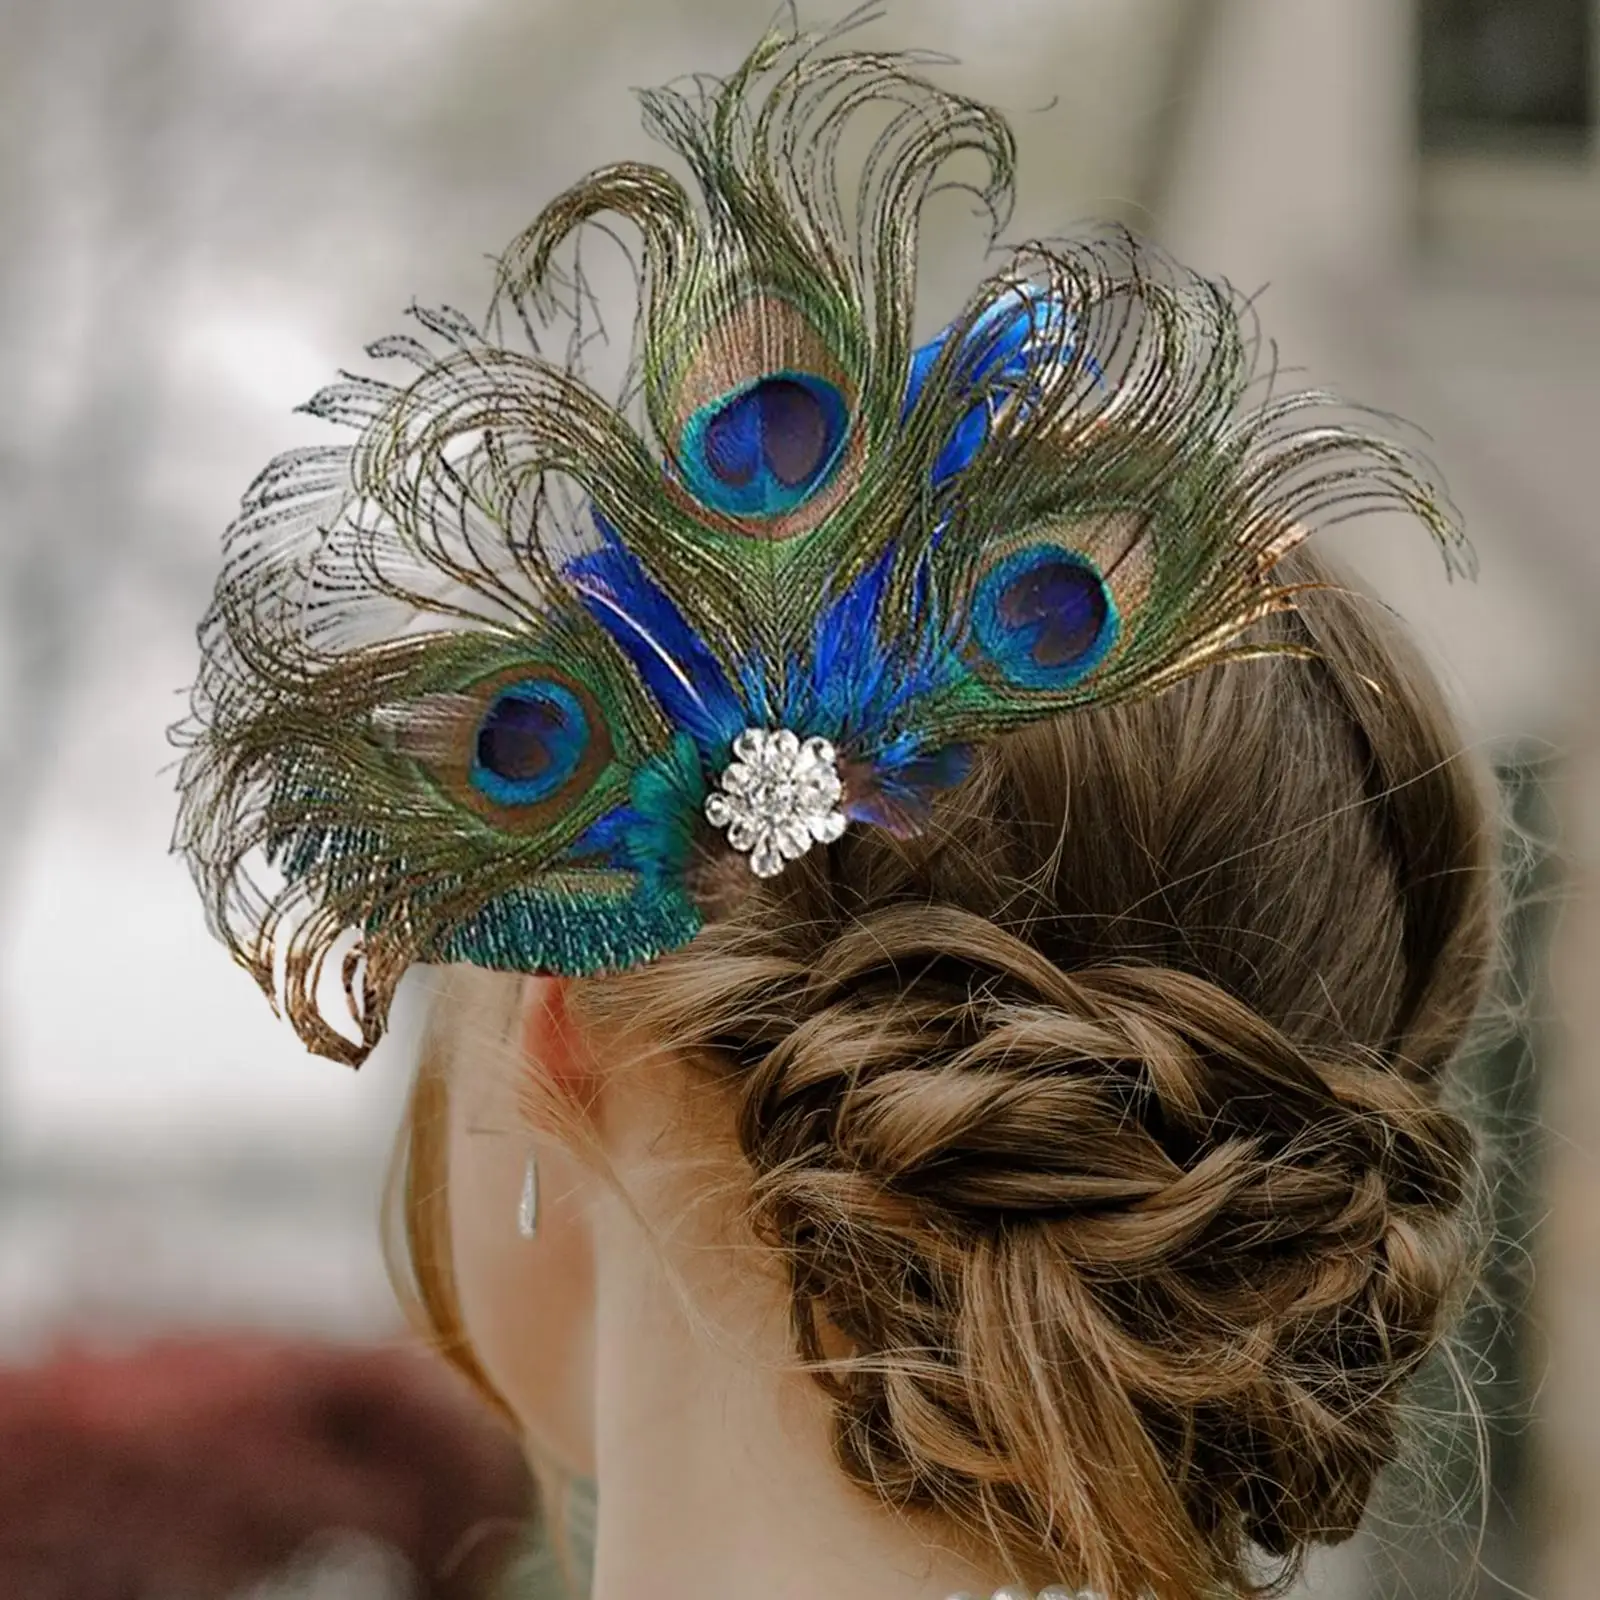 Women Peacock Feather Hair Clip Fascinator 1920S Vintage Elegant with Rhinestones Hairpin Headpiece for Wedding Accessories